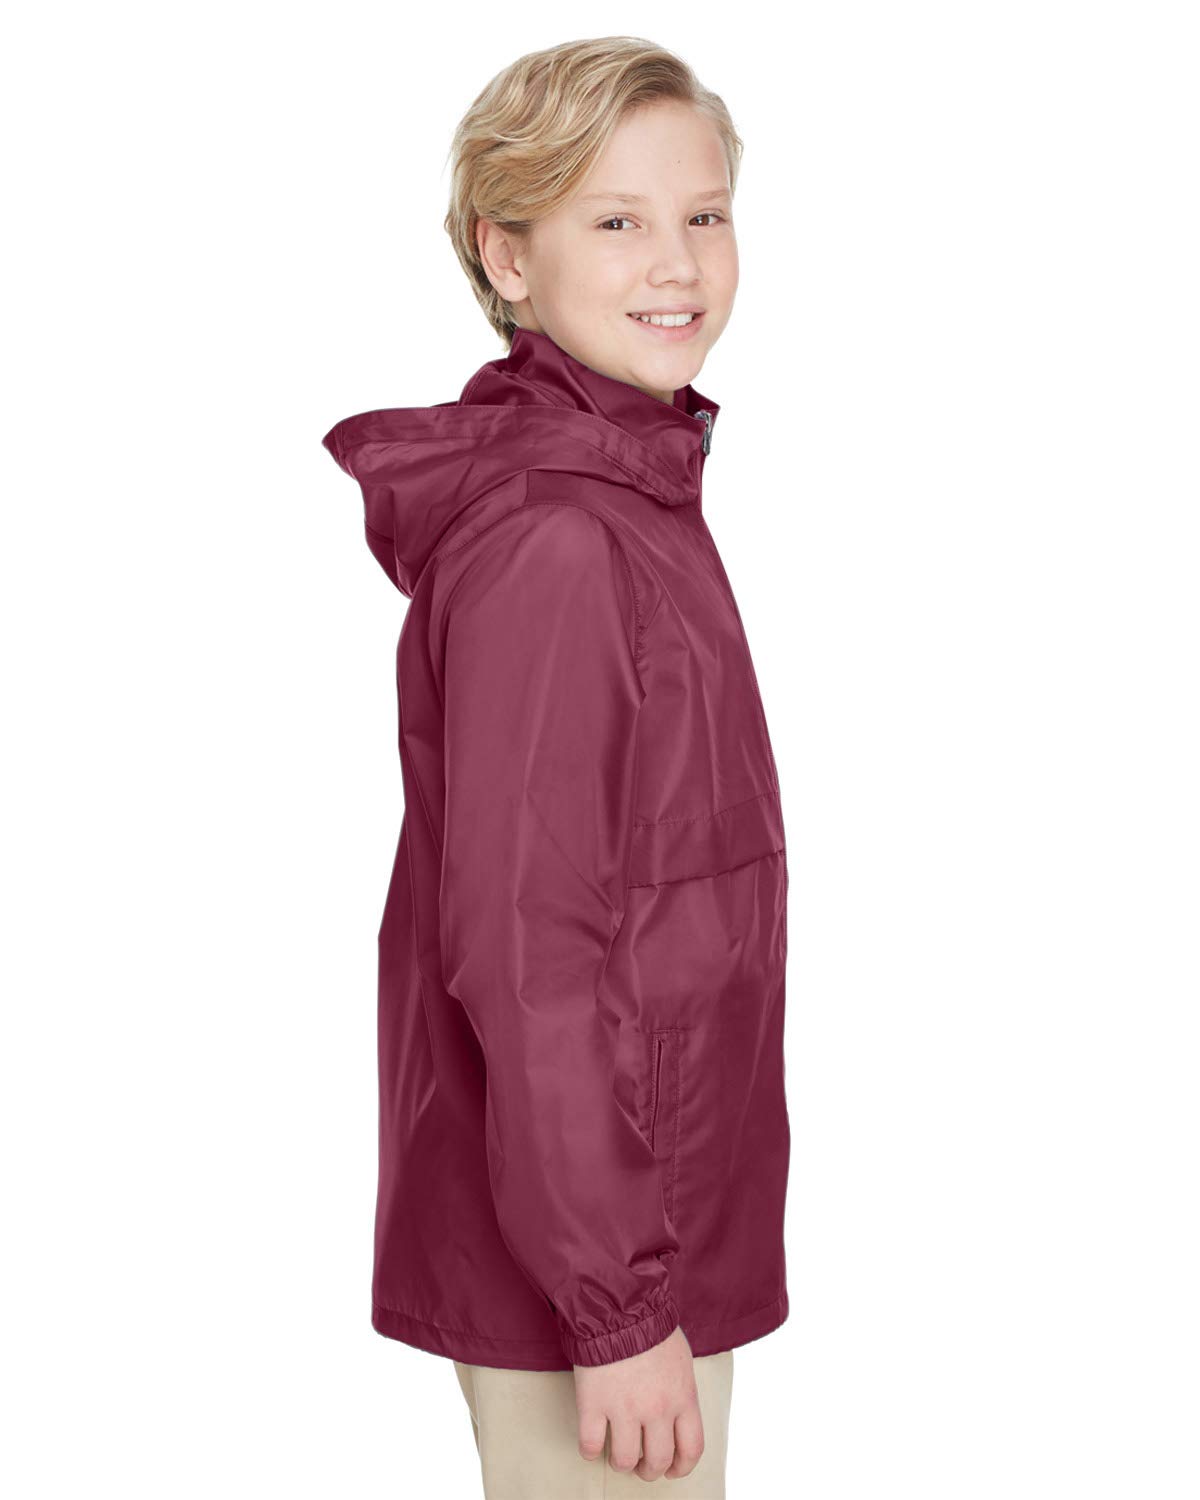 Team 365 Youth Zone Protect Lightweight Jacket M SPORT MAROON